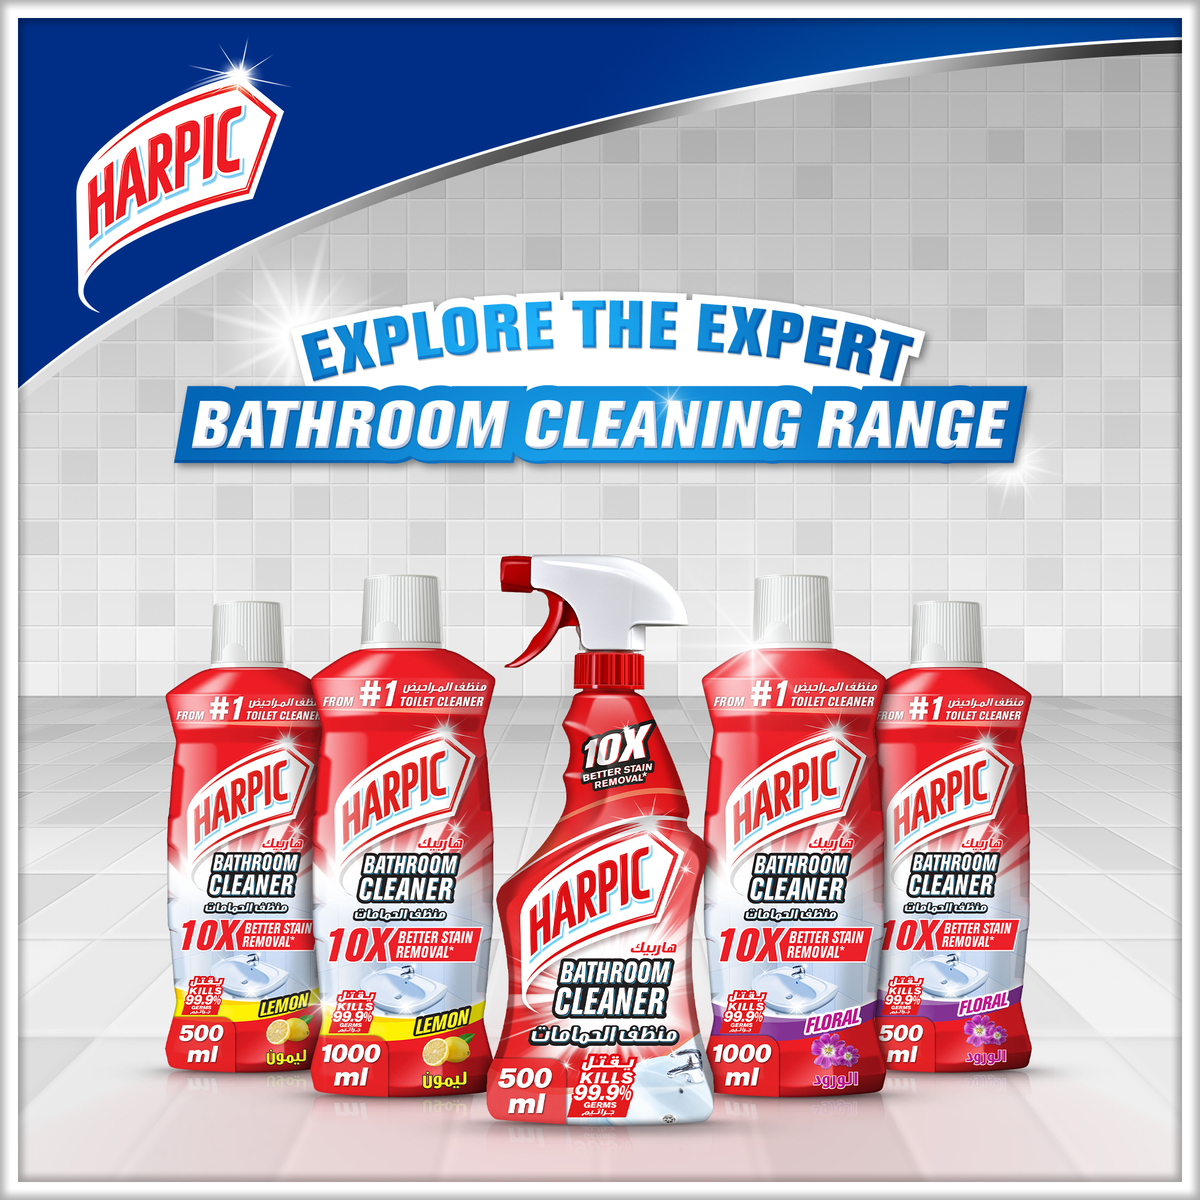 Harpic Bathroom Cleaner Trigger Spray for 10X Better Stain Removal 2 x 500 ml